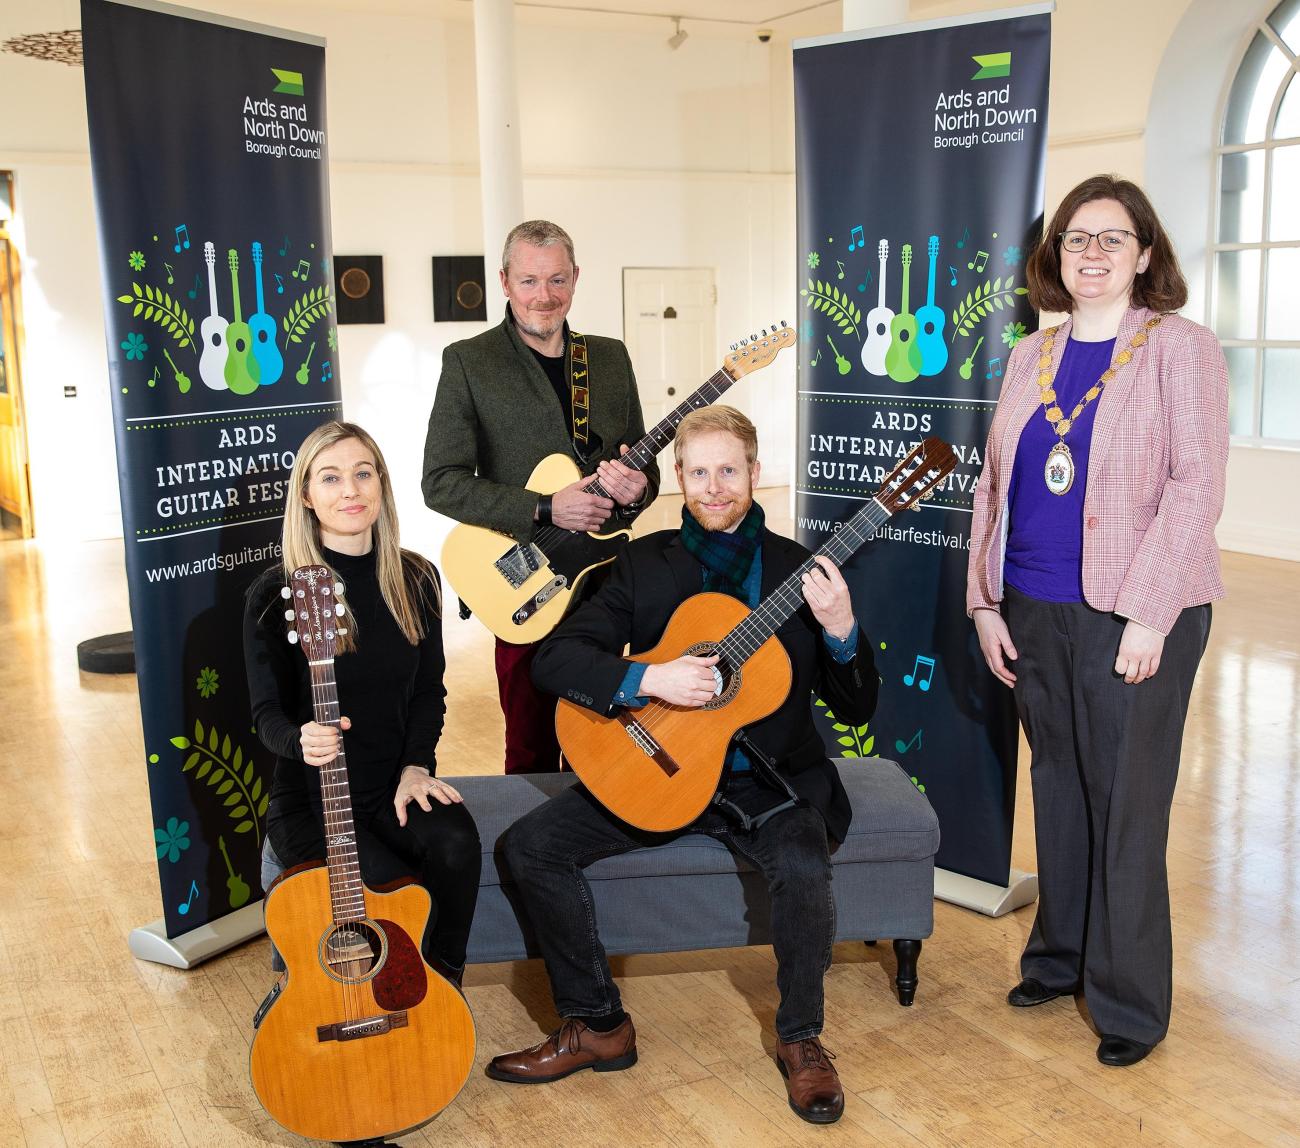 Three of the guitarists performing at the Ards Guitar Festival 2024 pose with their guitars with the current mayor of Ards, Jennifer Gilmour.